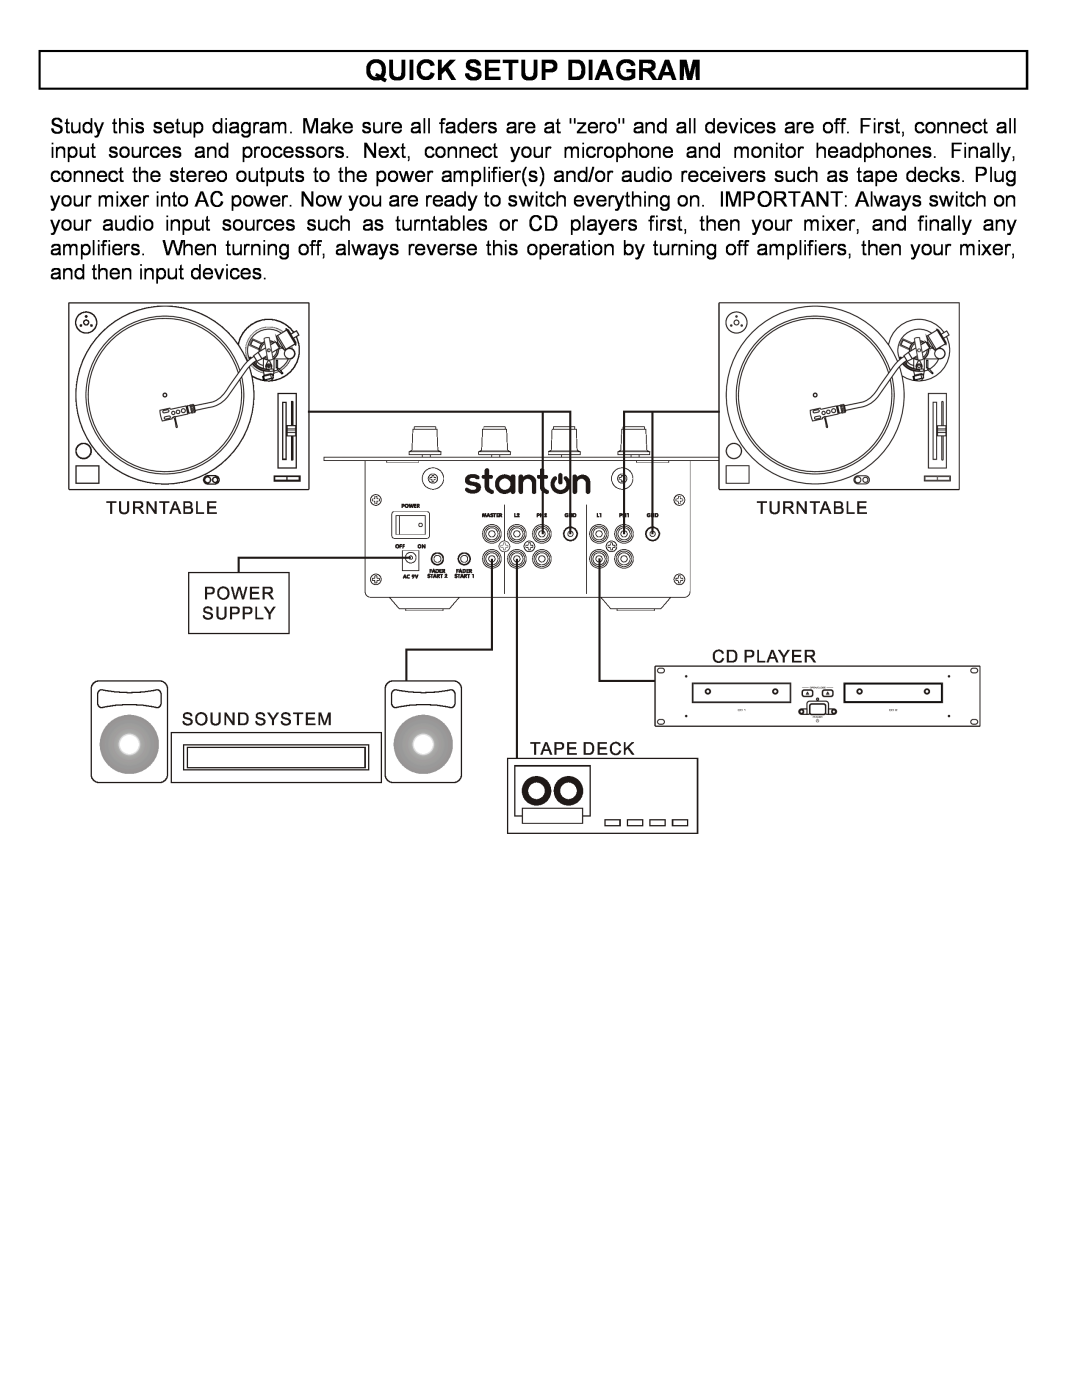 Stanton SMX.211 manual Quick Setup Diagram, Turntable Power Supply Sound System, Turntable Cd Player Tape Deck 